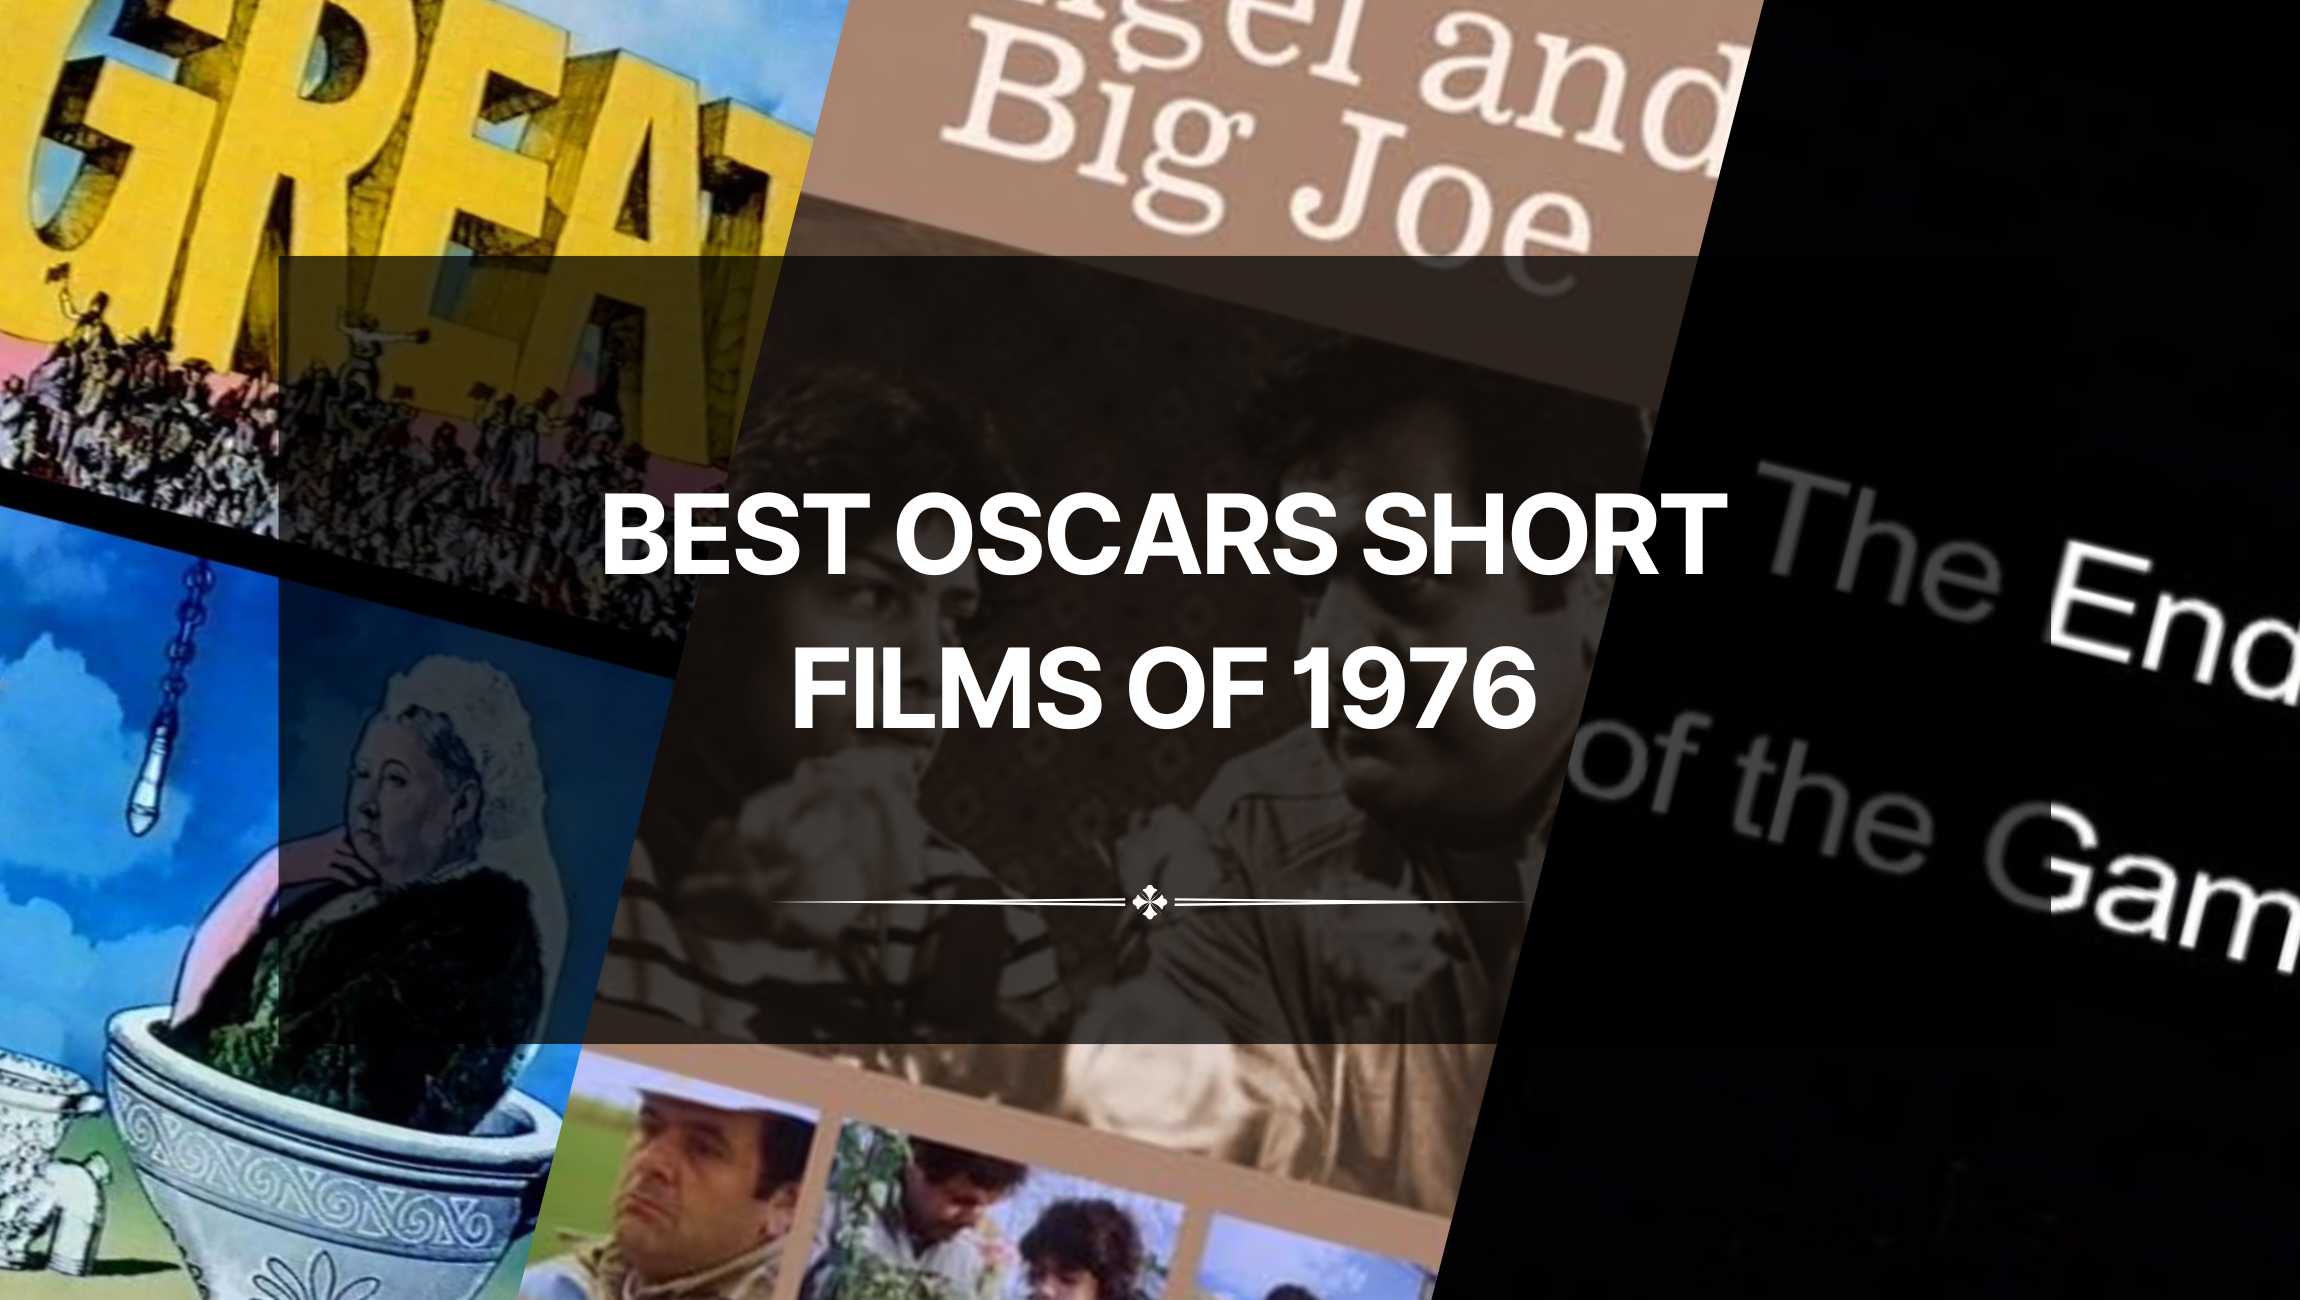 Best Oscars Short Films of 1976: Originality and Talent